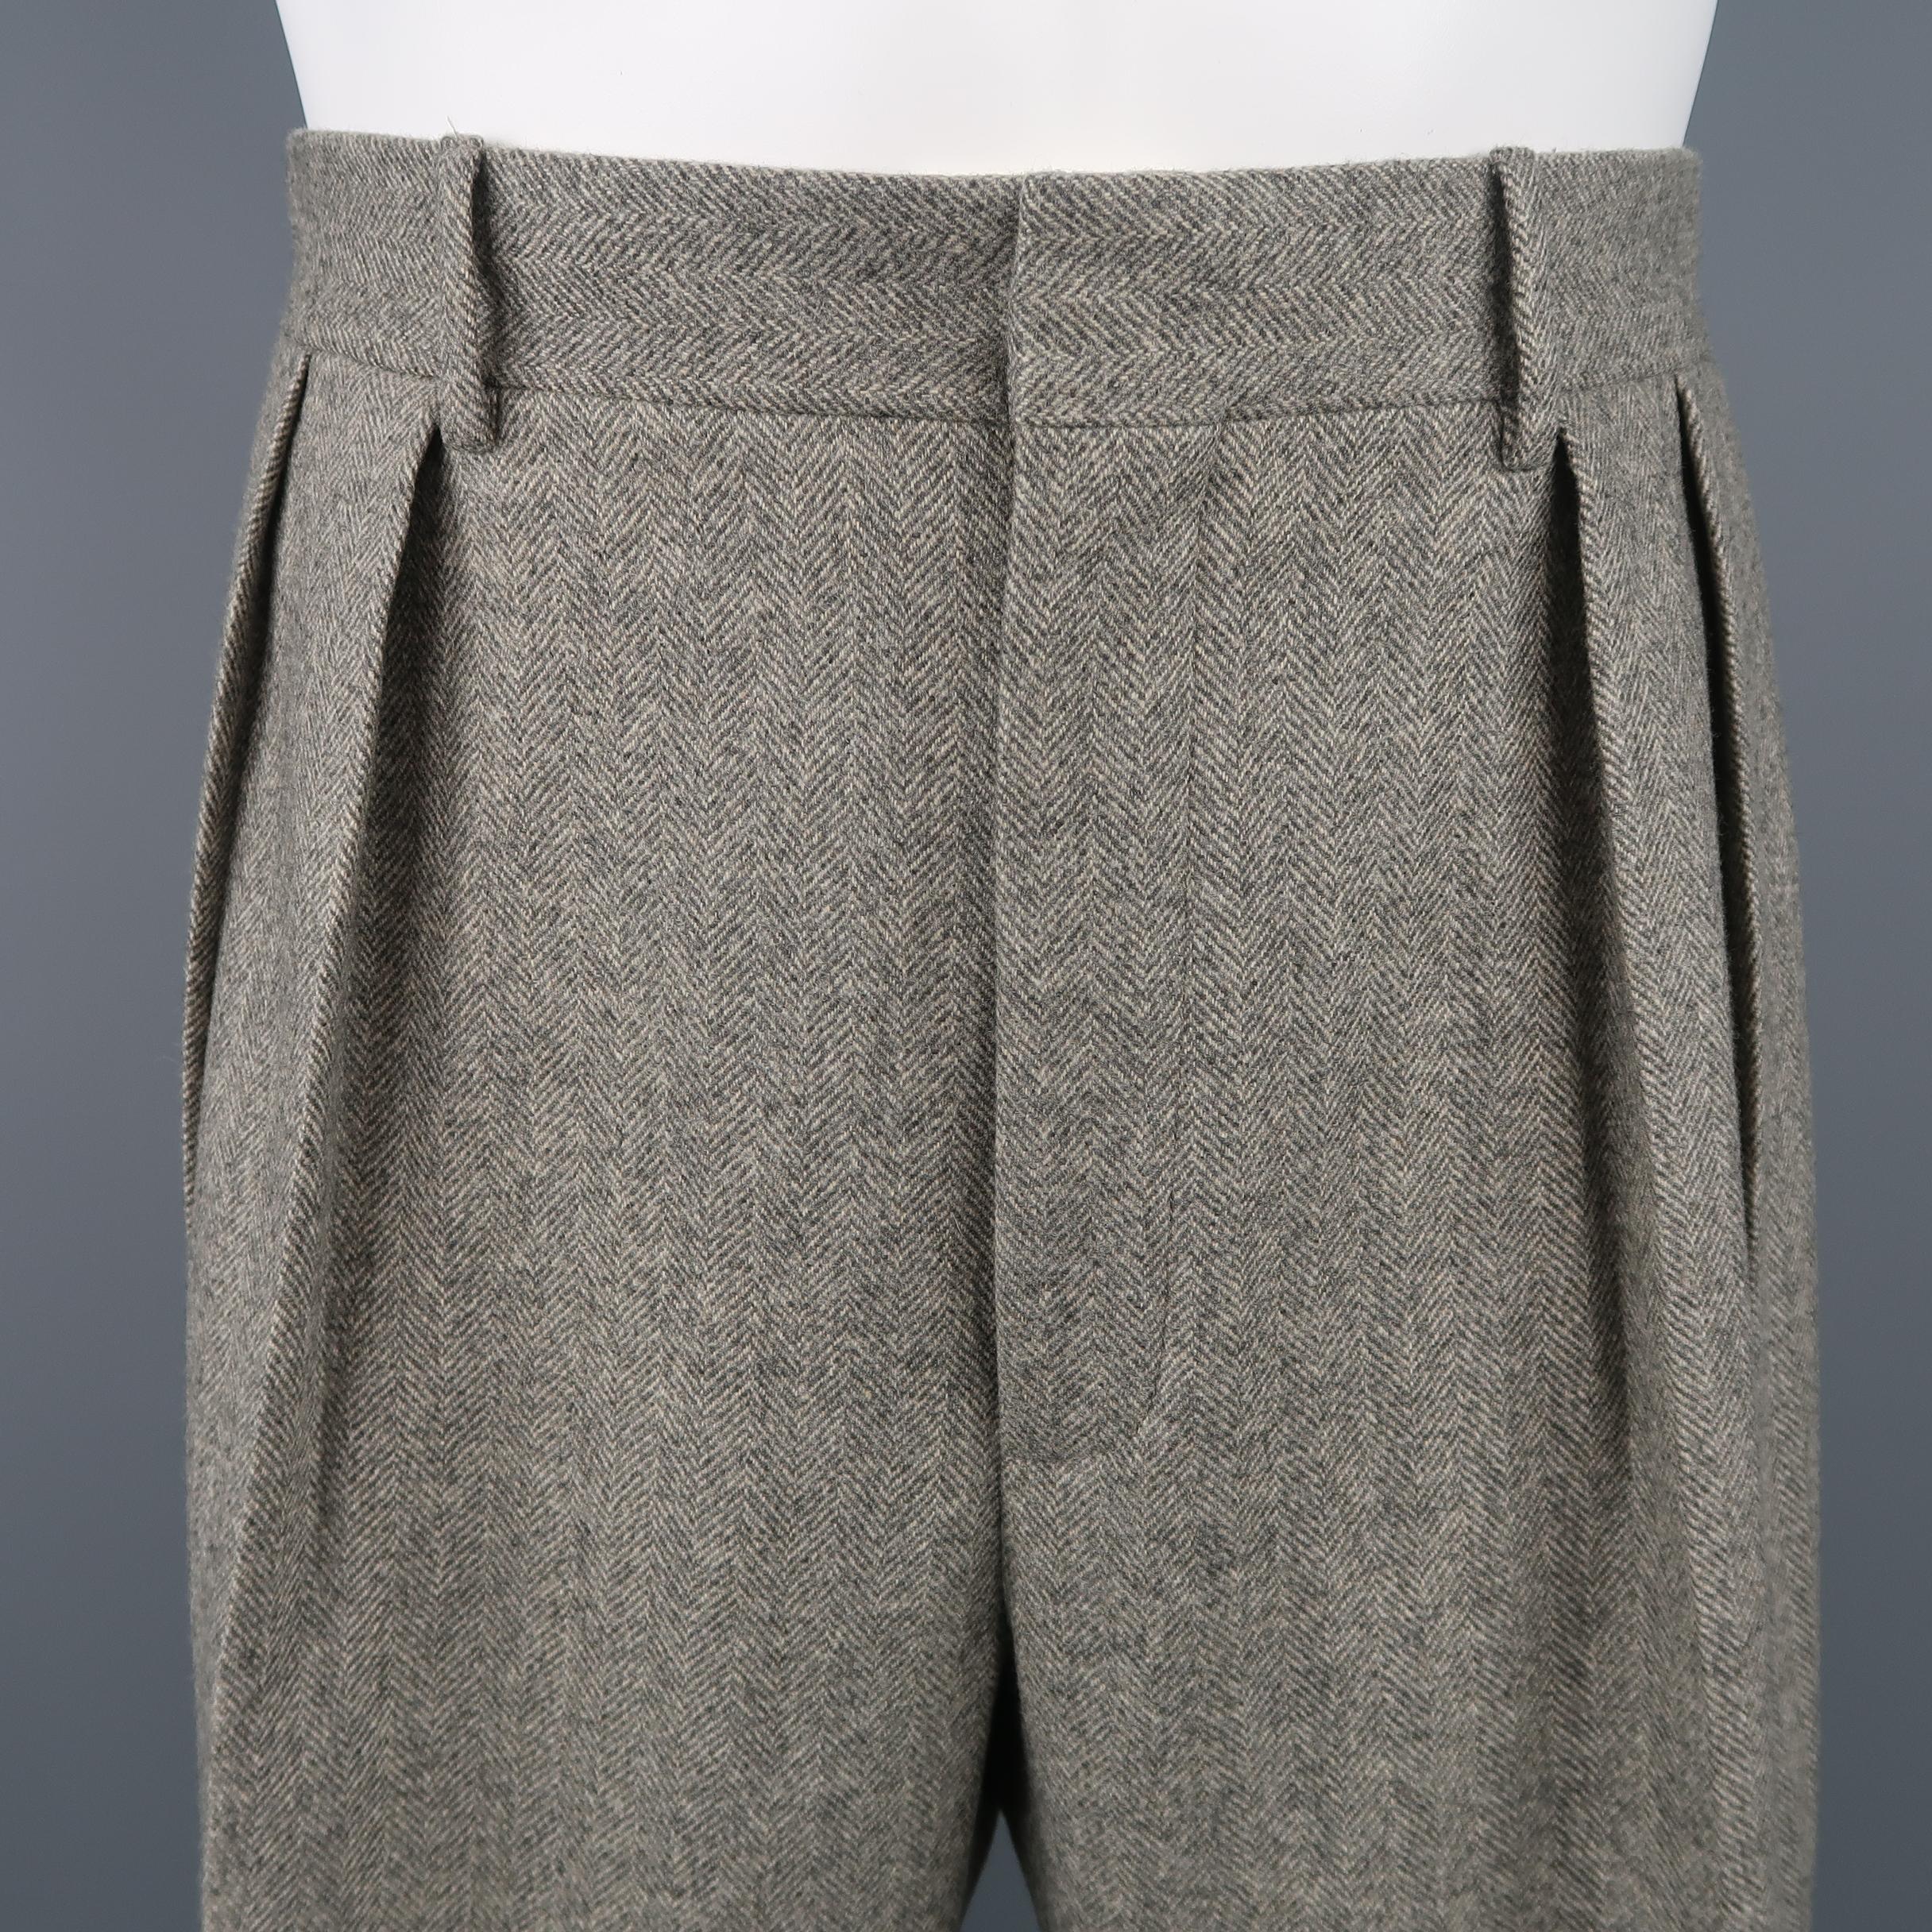 POLO RALPH LAUREN trousers come in gray herringbone wool with a pleated front, inner braces buttons, and cuffed hem. Made in Italy.
 
Good Pre-Owned Condition.
Marked: 34
 
Measurements:
 
Waist: 34 in.
Rise: 11.5 in.
Inseam: 31 in.